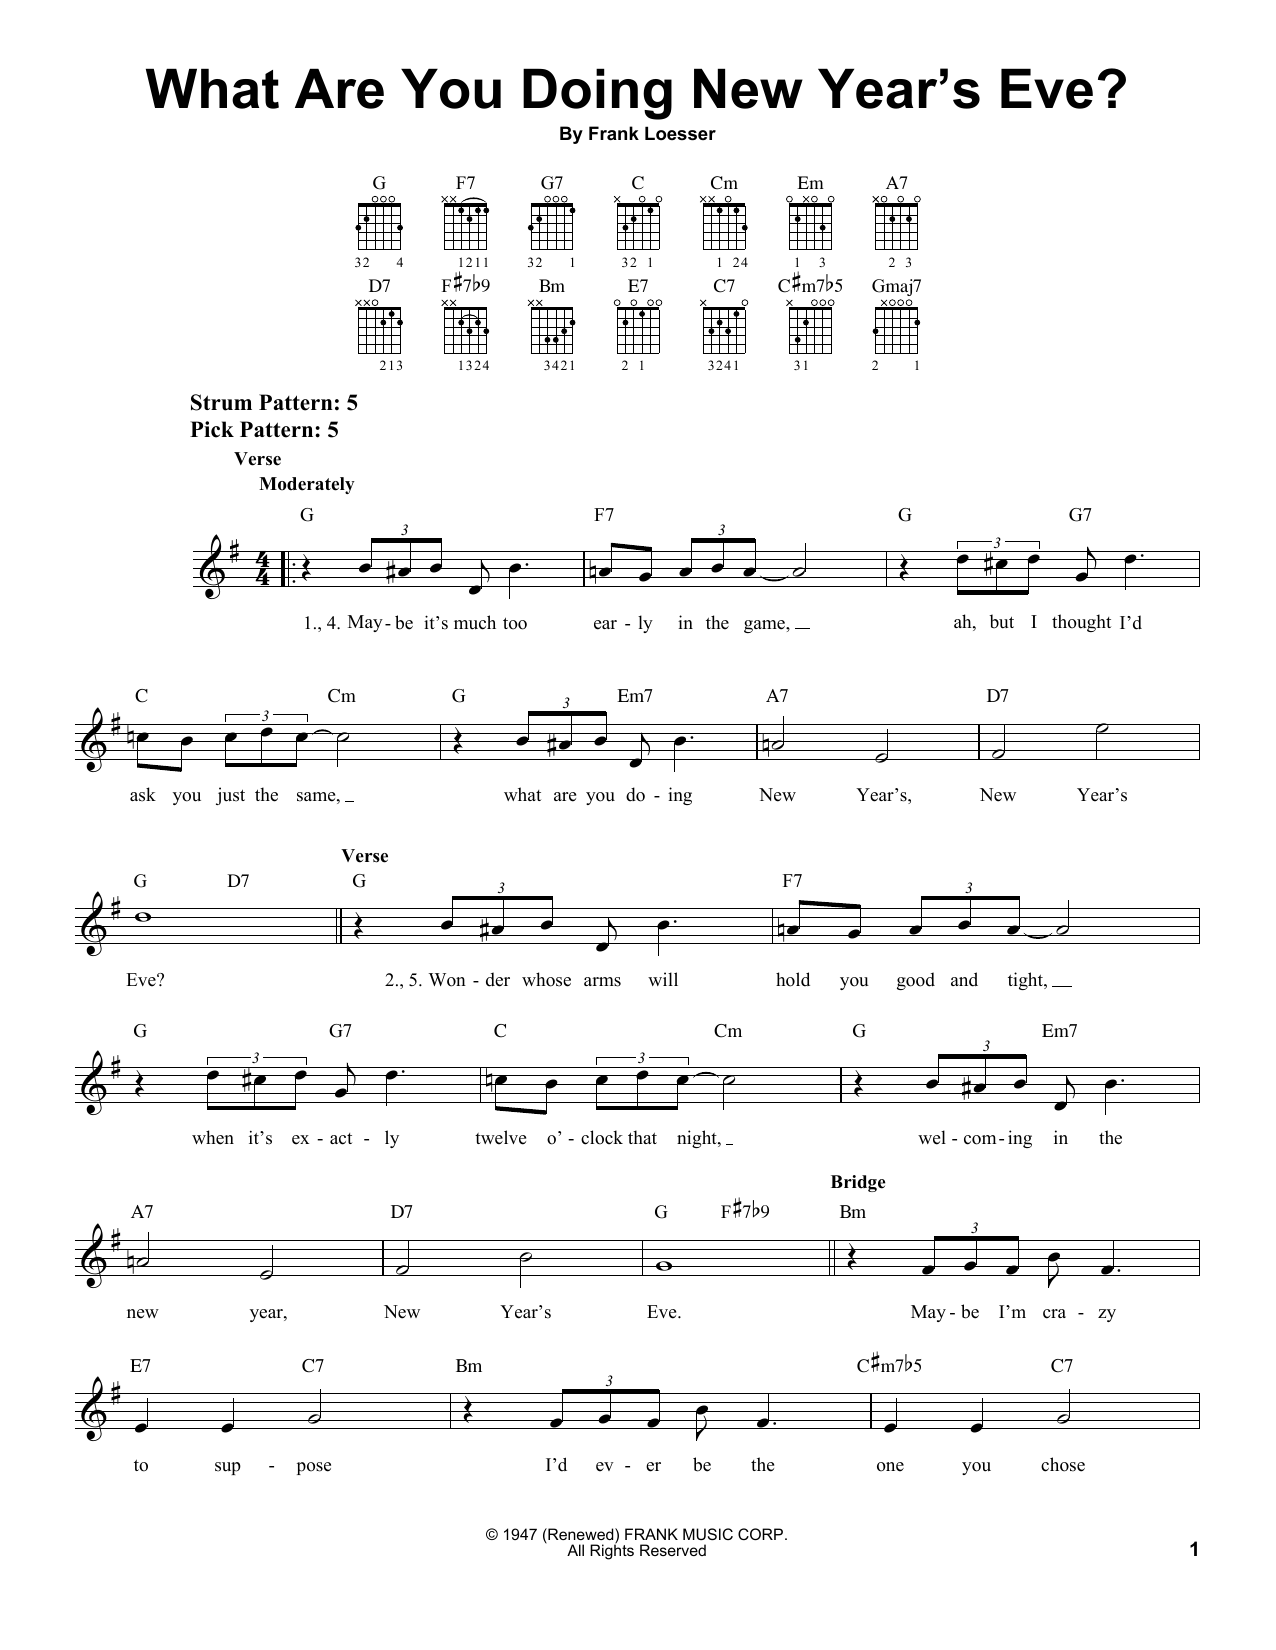 Frank Loesser What Are You Doing New Year's Eve? sheet music notes and chords. Download Printable PDF.